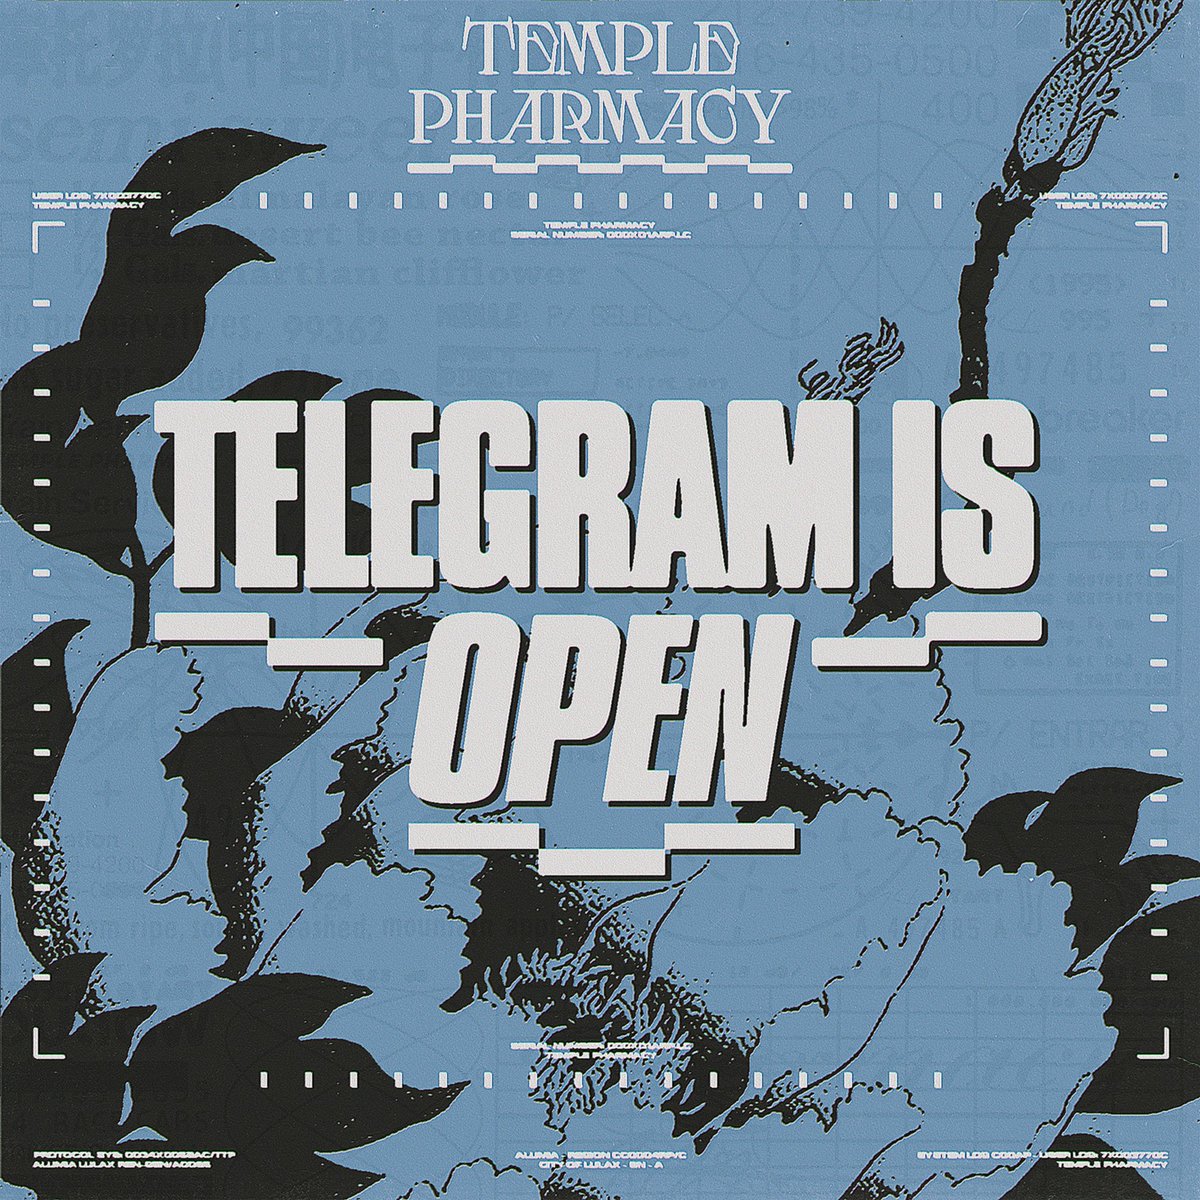 Official Telegram for $TEMPLE is now OPEN. 🏯 For the latest updates join here: t.me/TemplePharmacy… The token is launching shortly. We'll use our telegram channel to announce the LP creation. Tag a friend below to register for the last-minute airdrop.